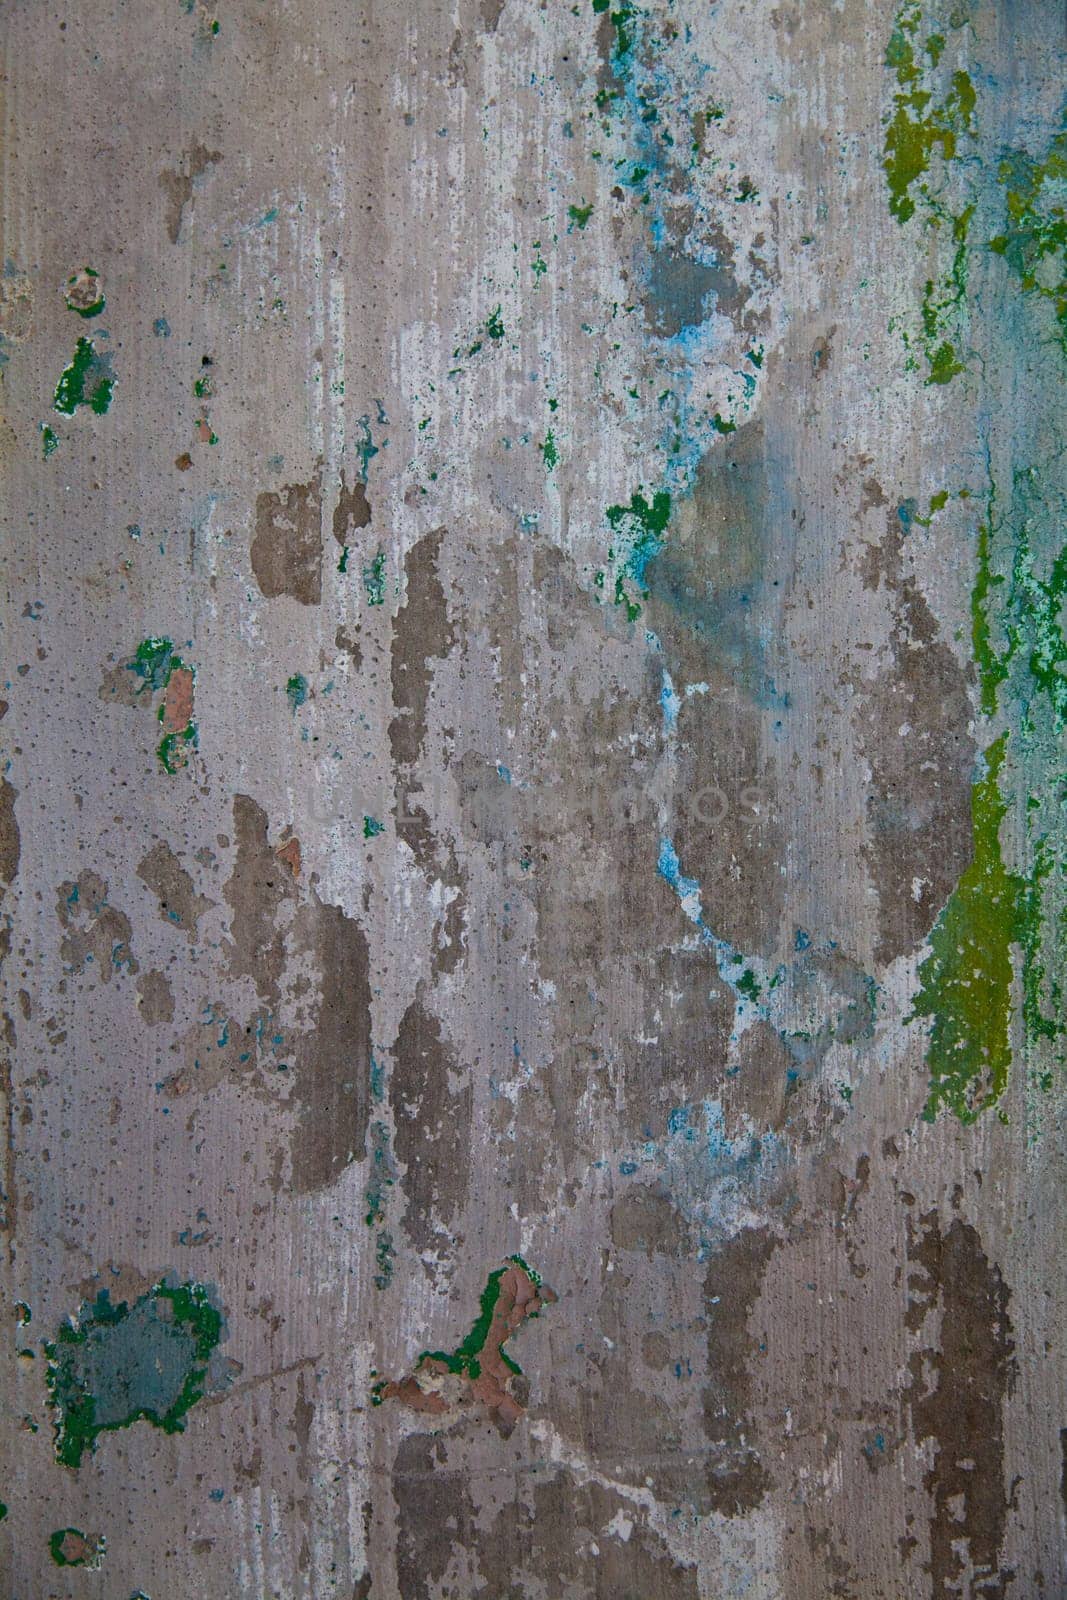 Weathered Wall with Peeling Paint in Pierceton Factory Close-Up by njproductions